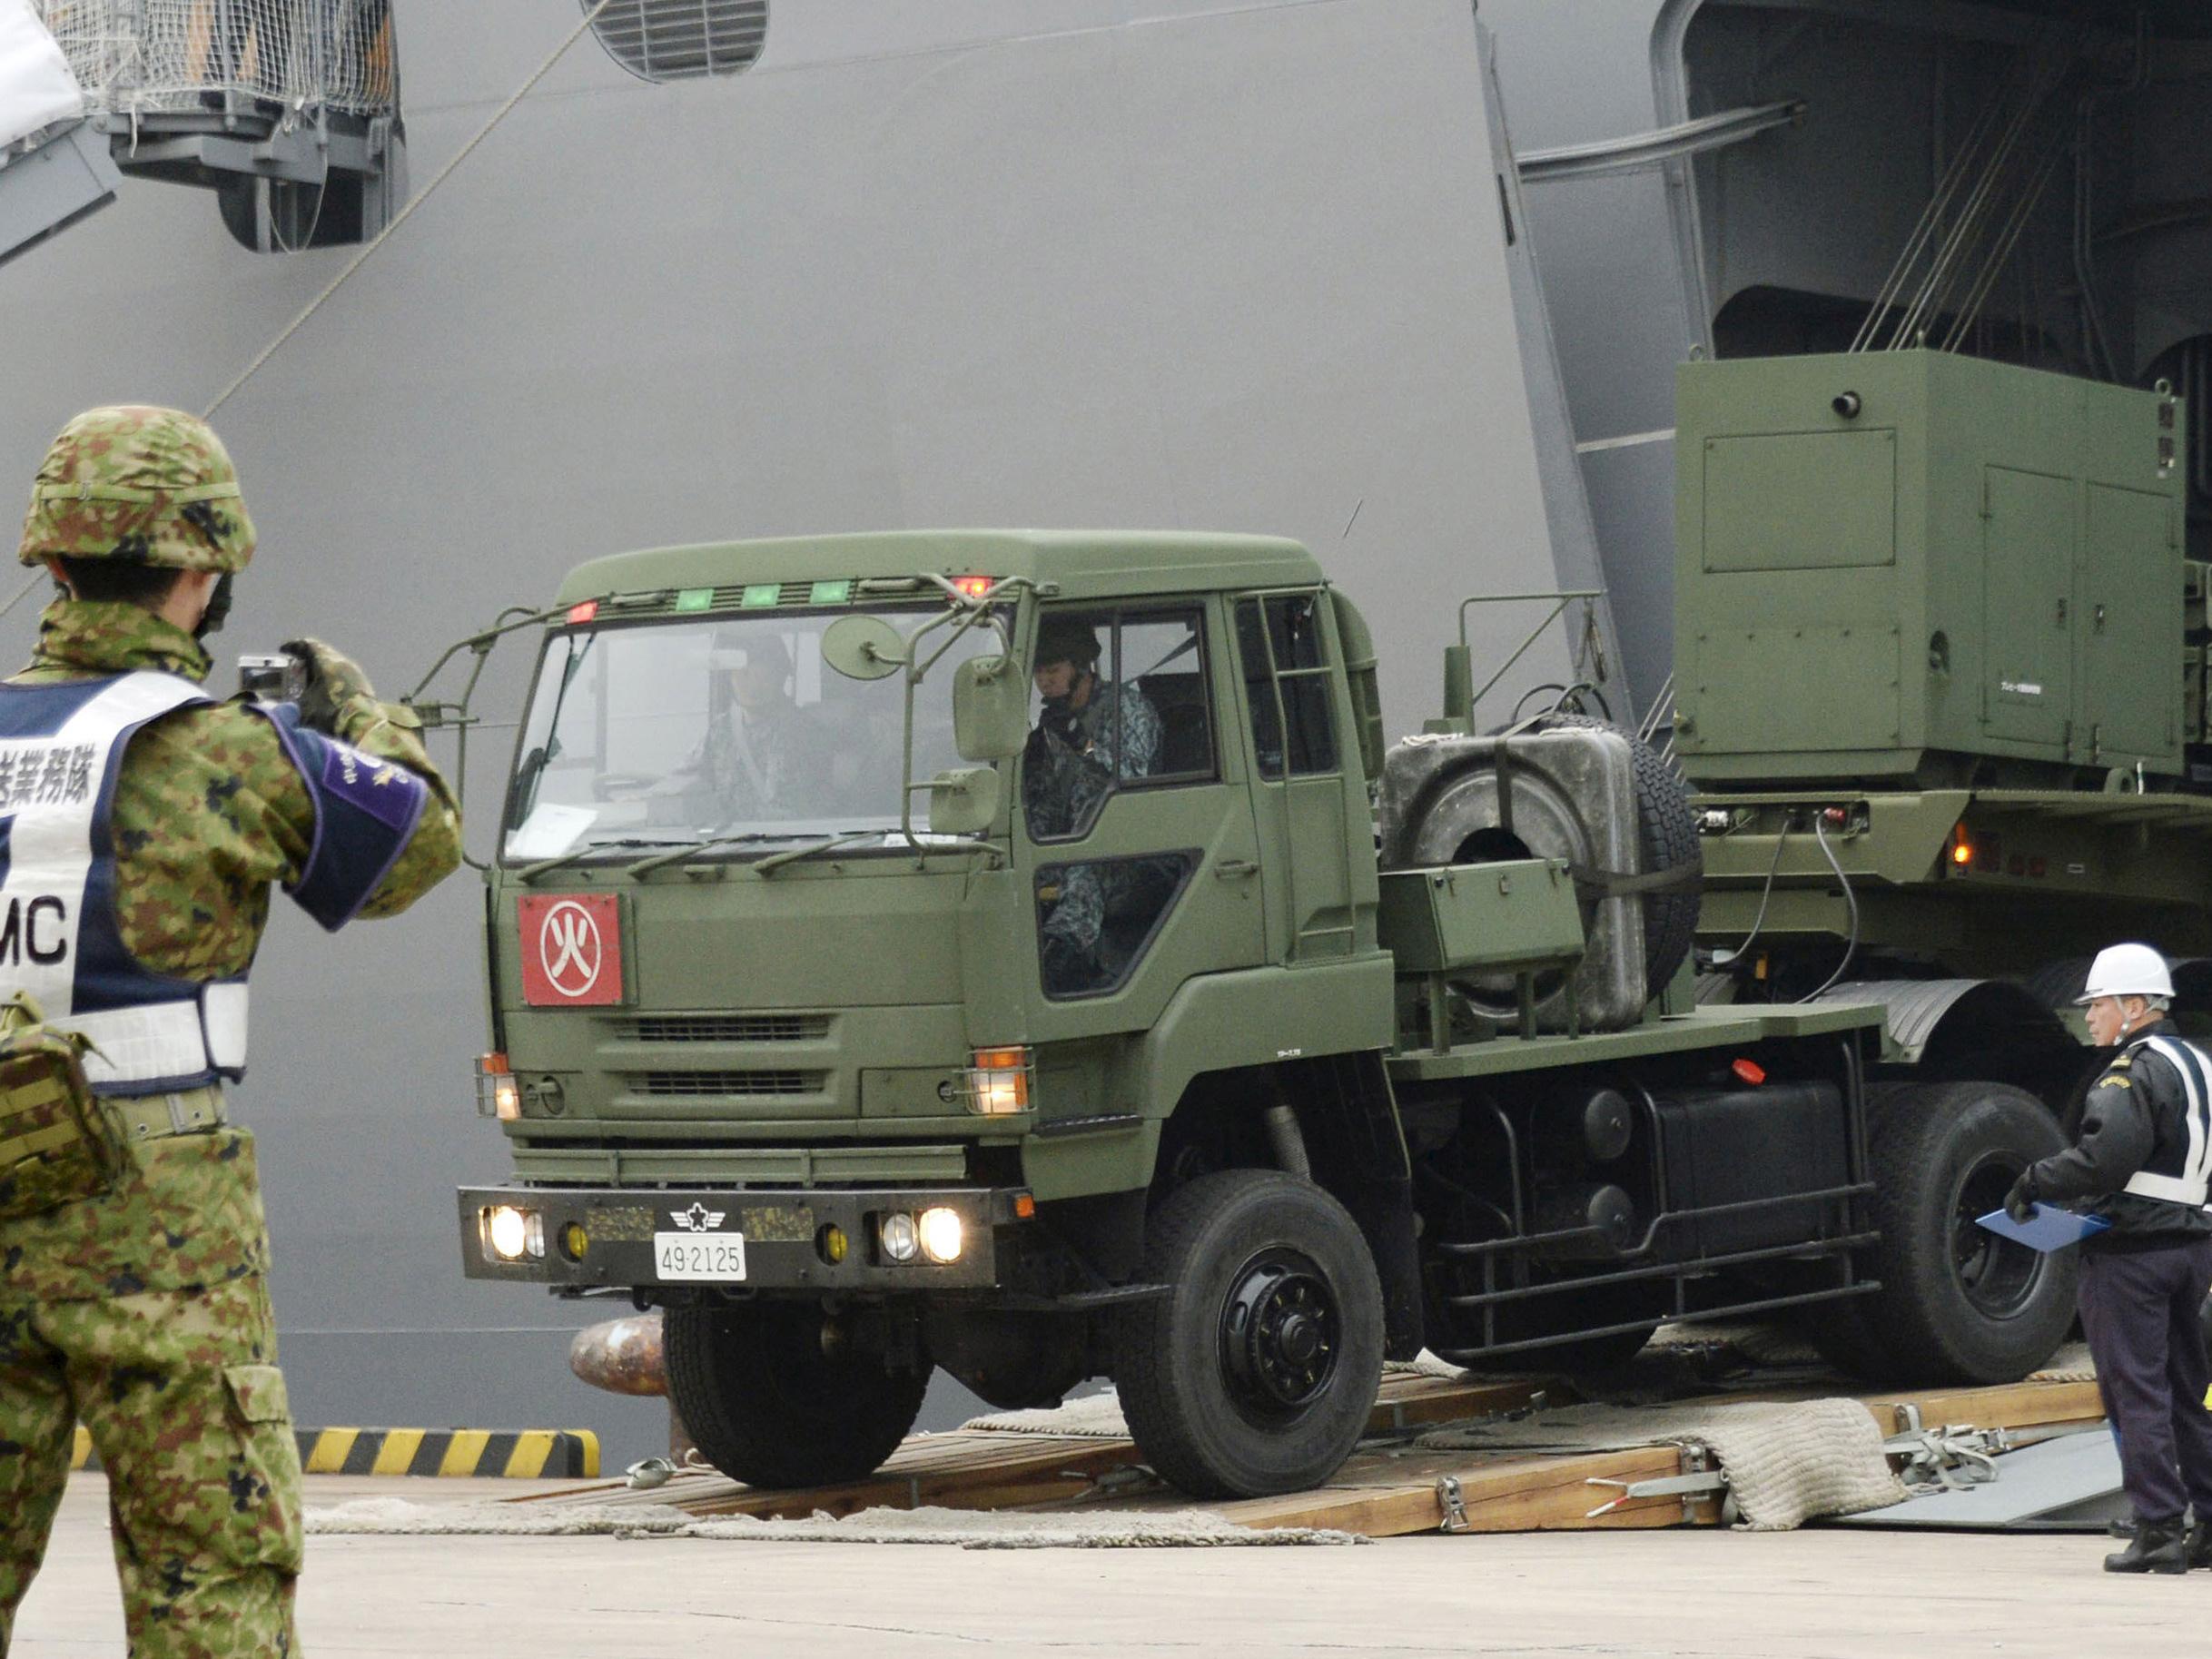 A Japanese Self-Defence Forces' vehicle carrying units of Patriot Advanced Capability-3 (PAC-3) missiles leaves a port on Japan's southern island of Ishigaki, Okinawa prefecture